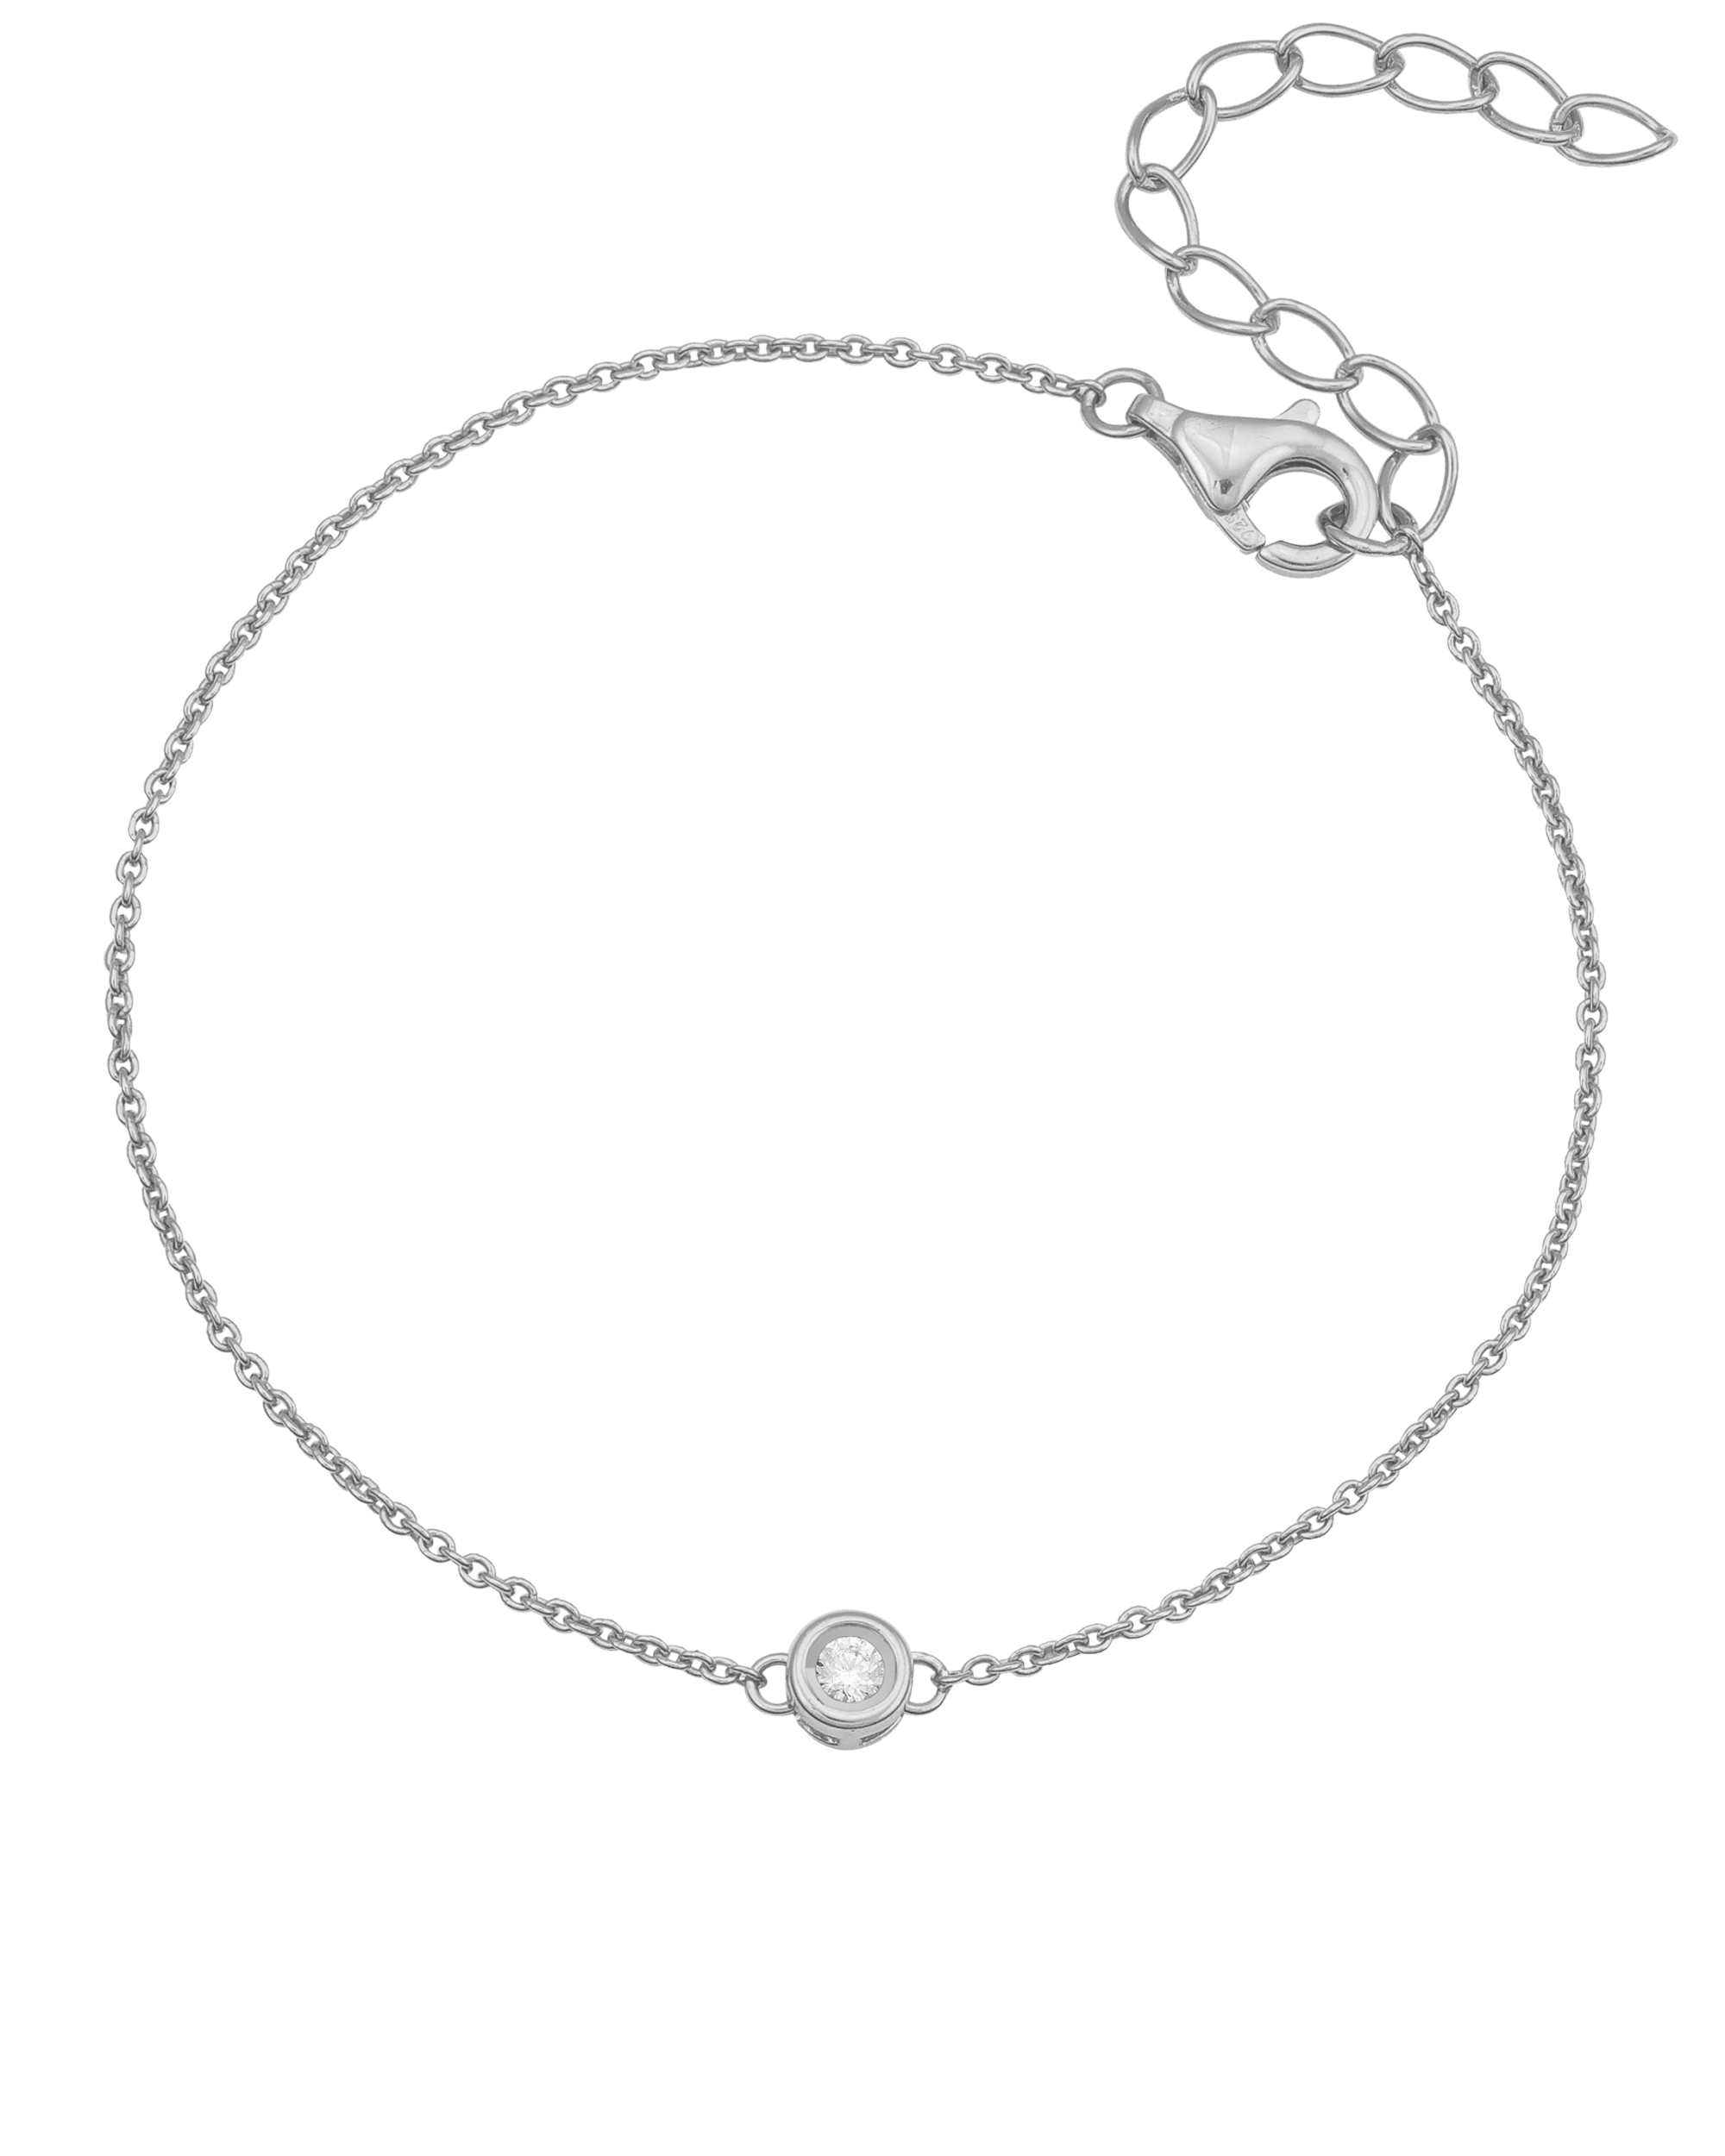 Chain of Love - 925 Sterling Silver Bracelets magal-dev Small: 0.03ct 6" with 1.5" extender 